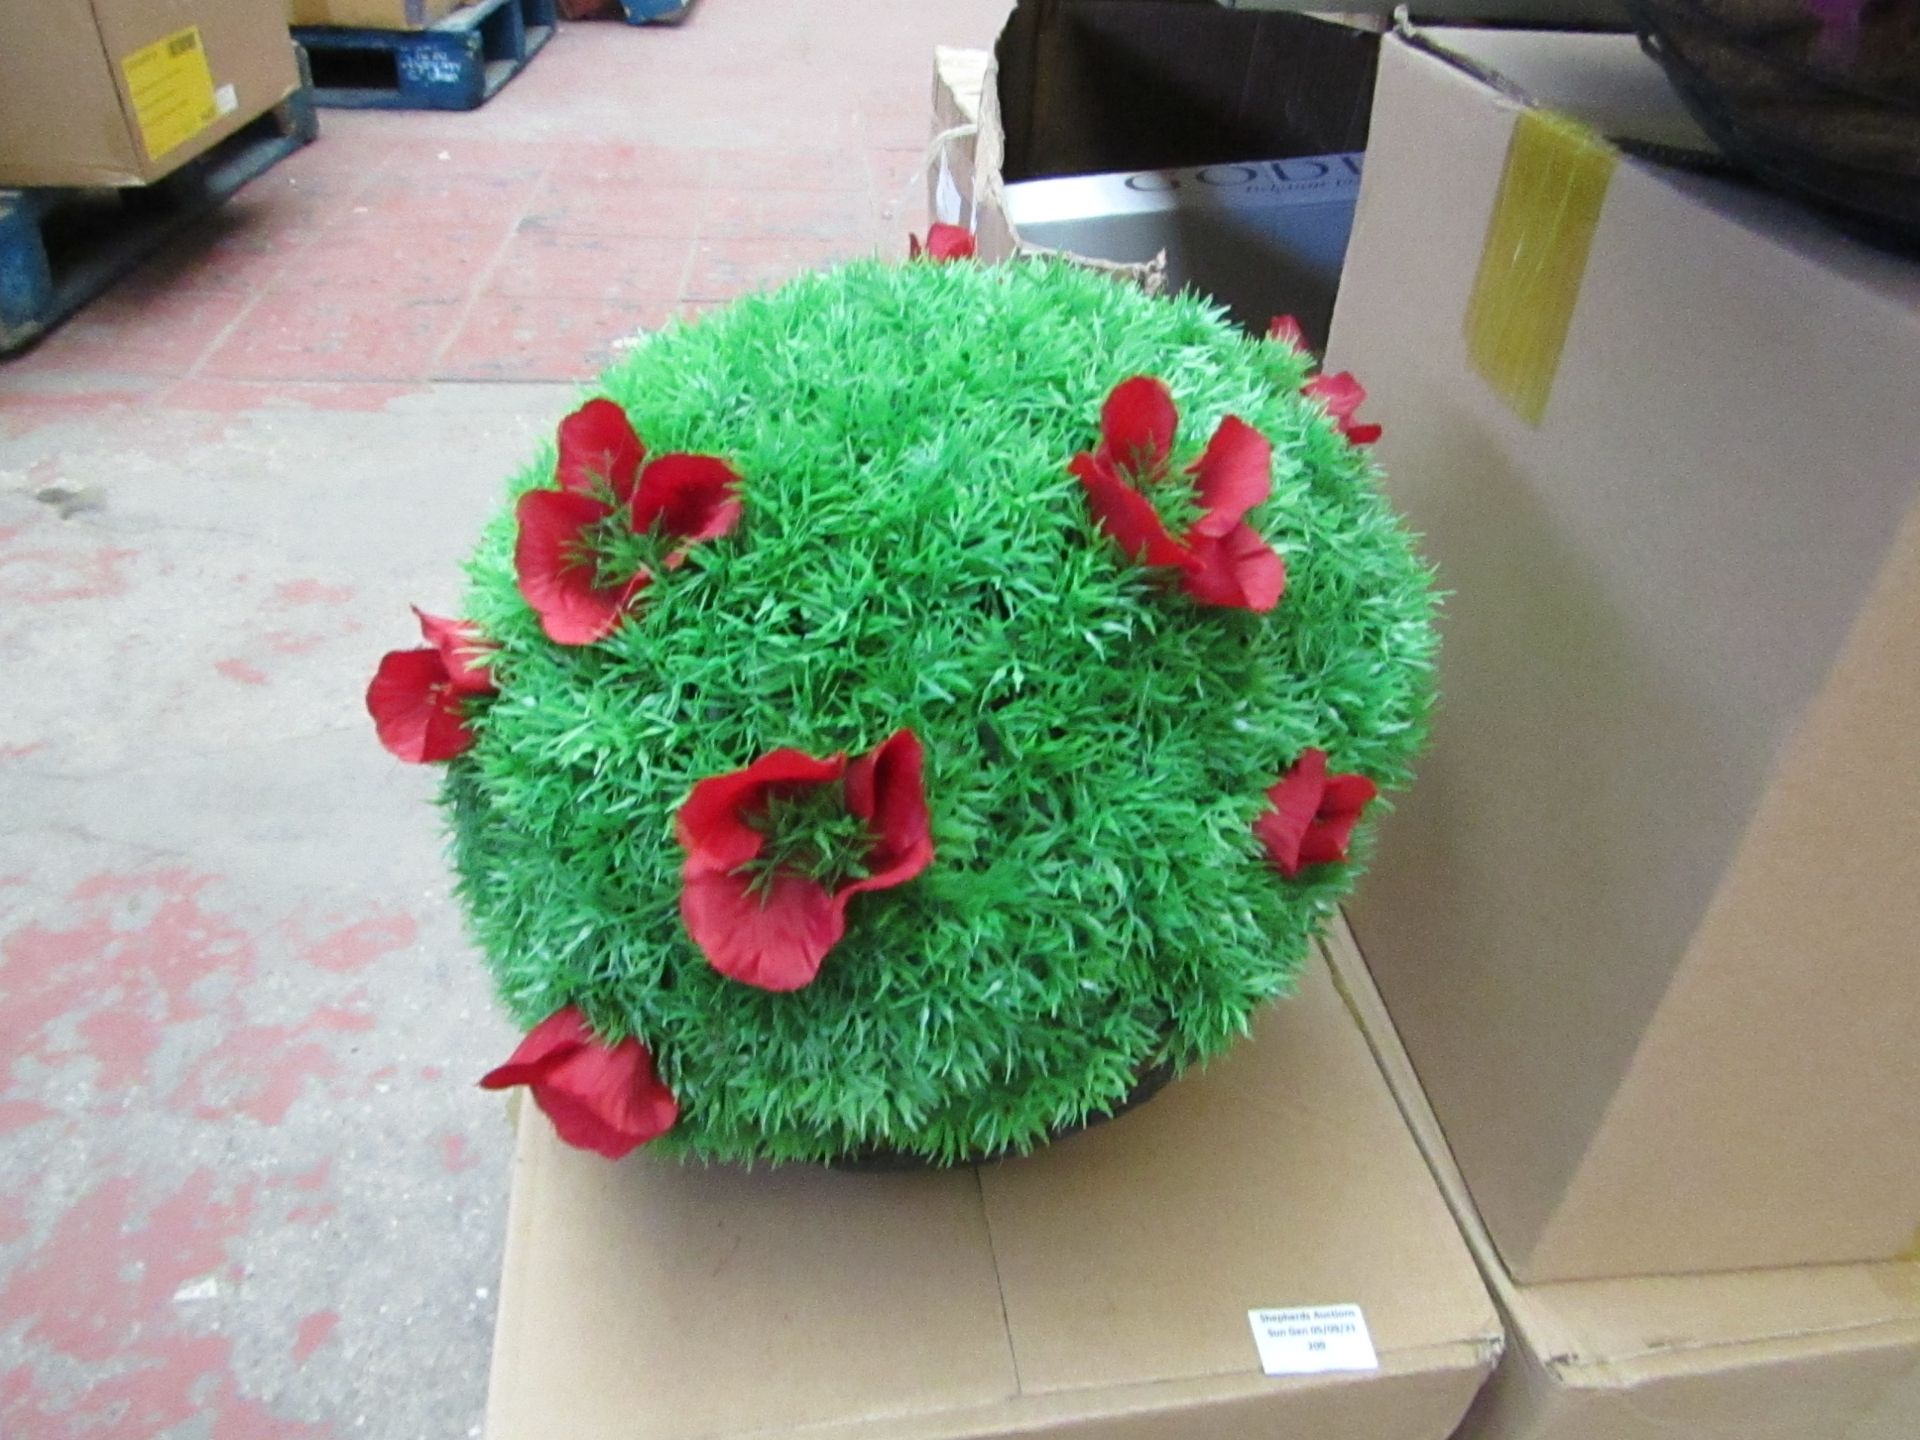 Flower Topiary Garden Ball 12" - Unused & Boxed. - Please See See Image For Design.